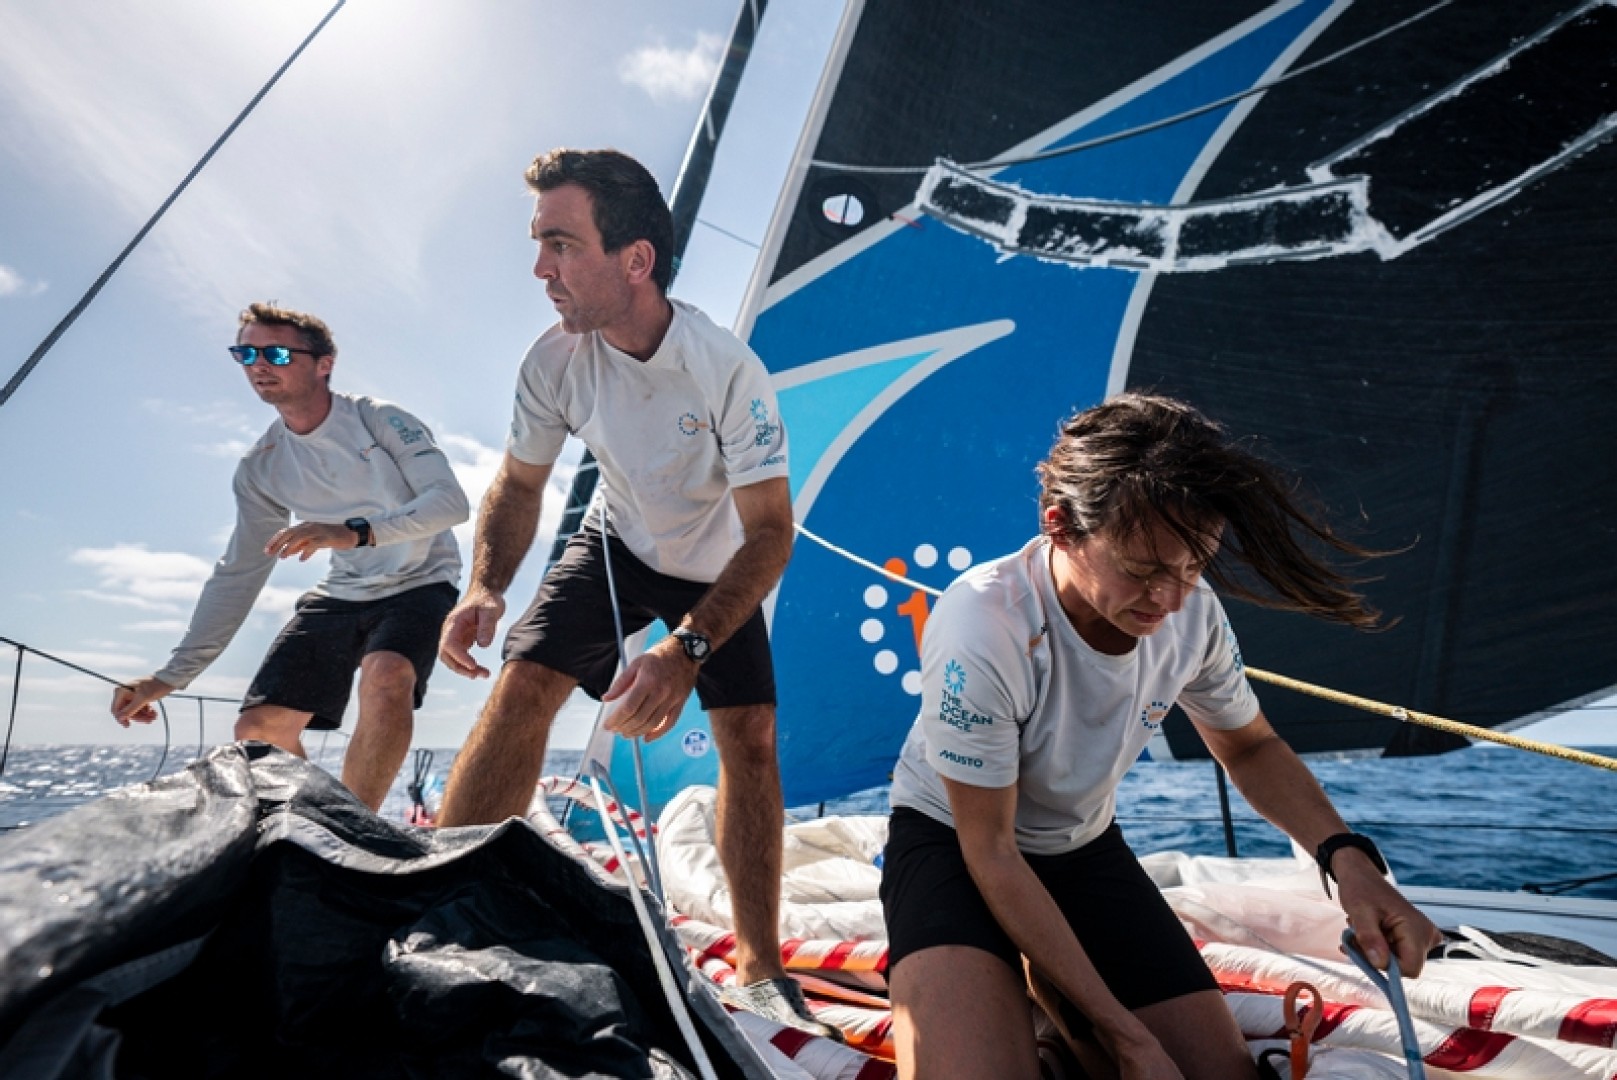 Onboard 11th Hour Racing Team during Leg 2, Day 3. Justine Mettraux, Charlie Enright and Jack Bouttell on the bow during a spinnaker peel.
© Amory Ross / The Ocean Race